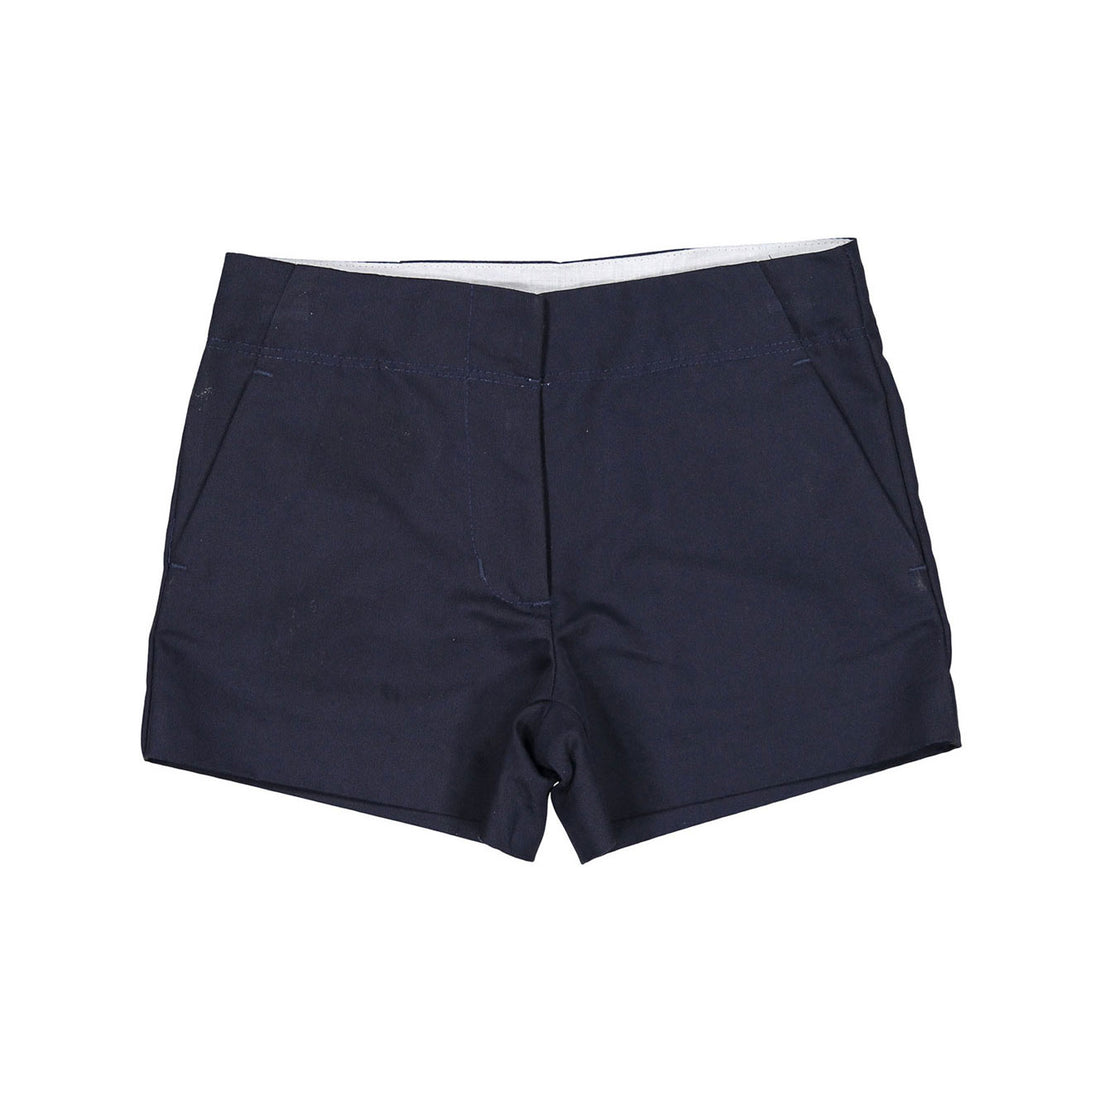 L by Ladida Navy StructuredShorts